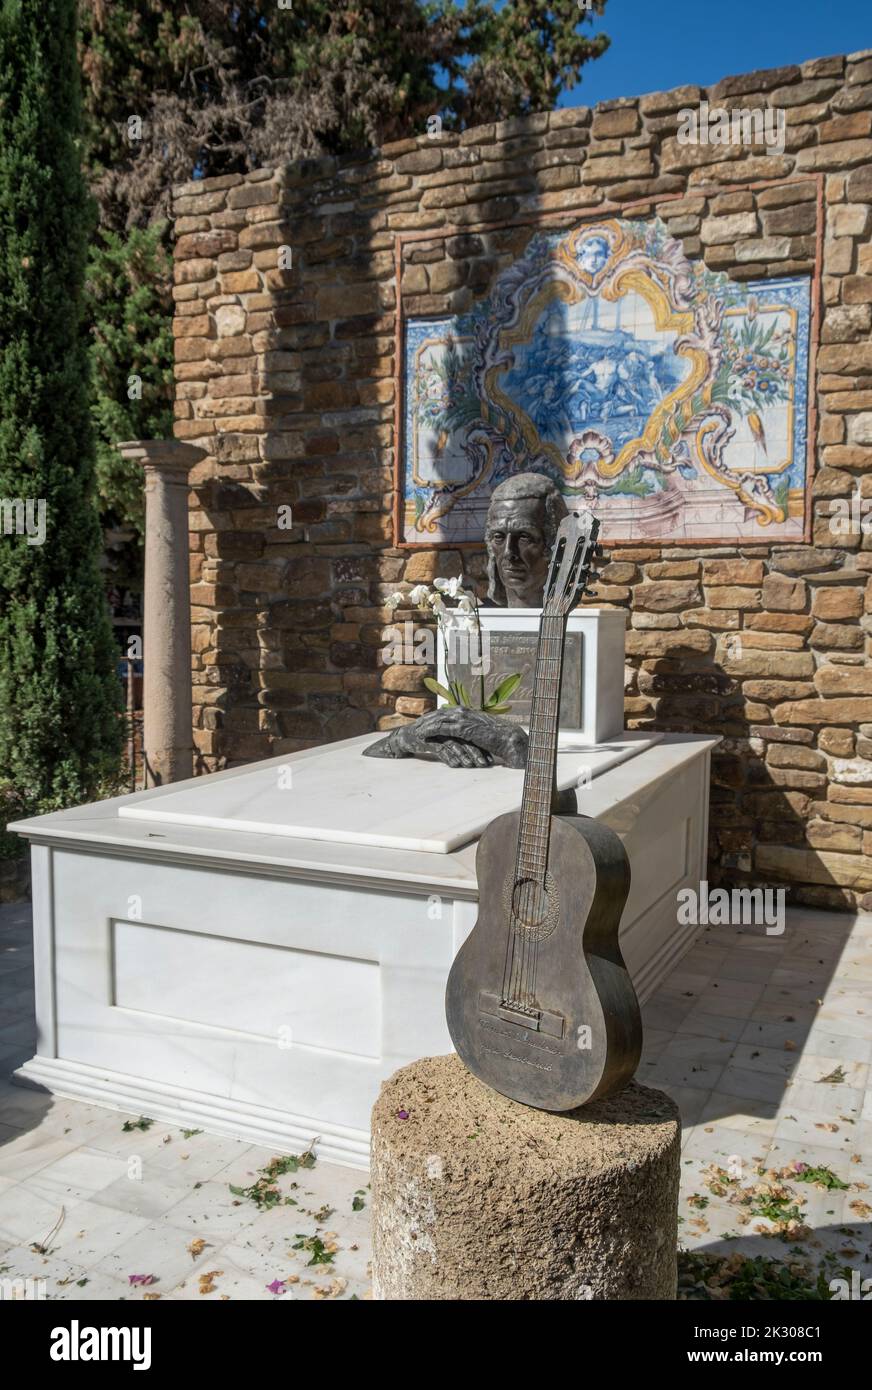 The tomb of Paco De Lucia, the Spanish virtuoso flamenco guitarist, composer and record producer, at the old cemetery in Algeciras, Spain. Stock Photo